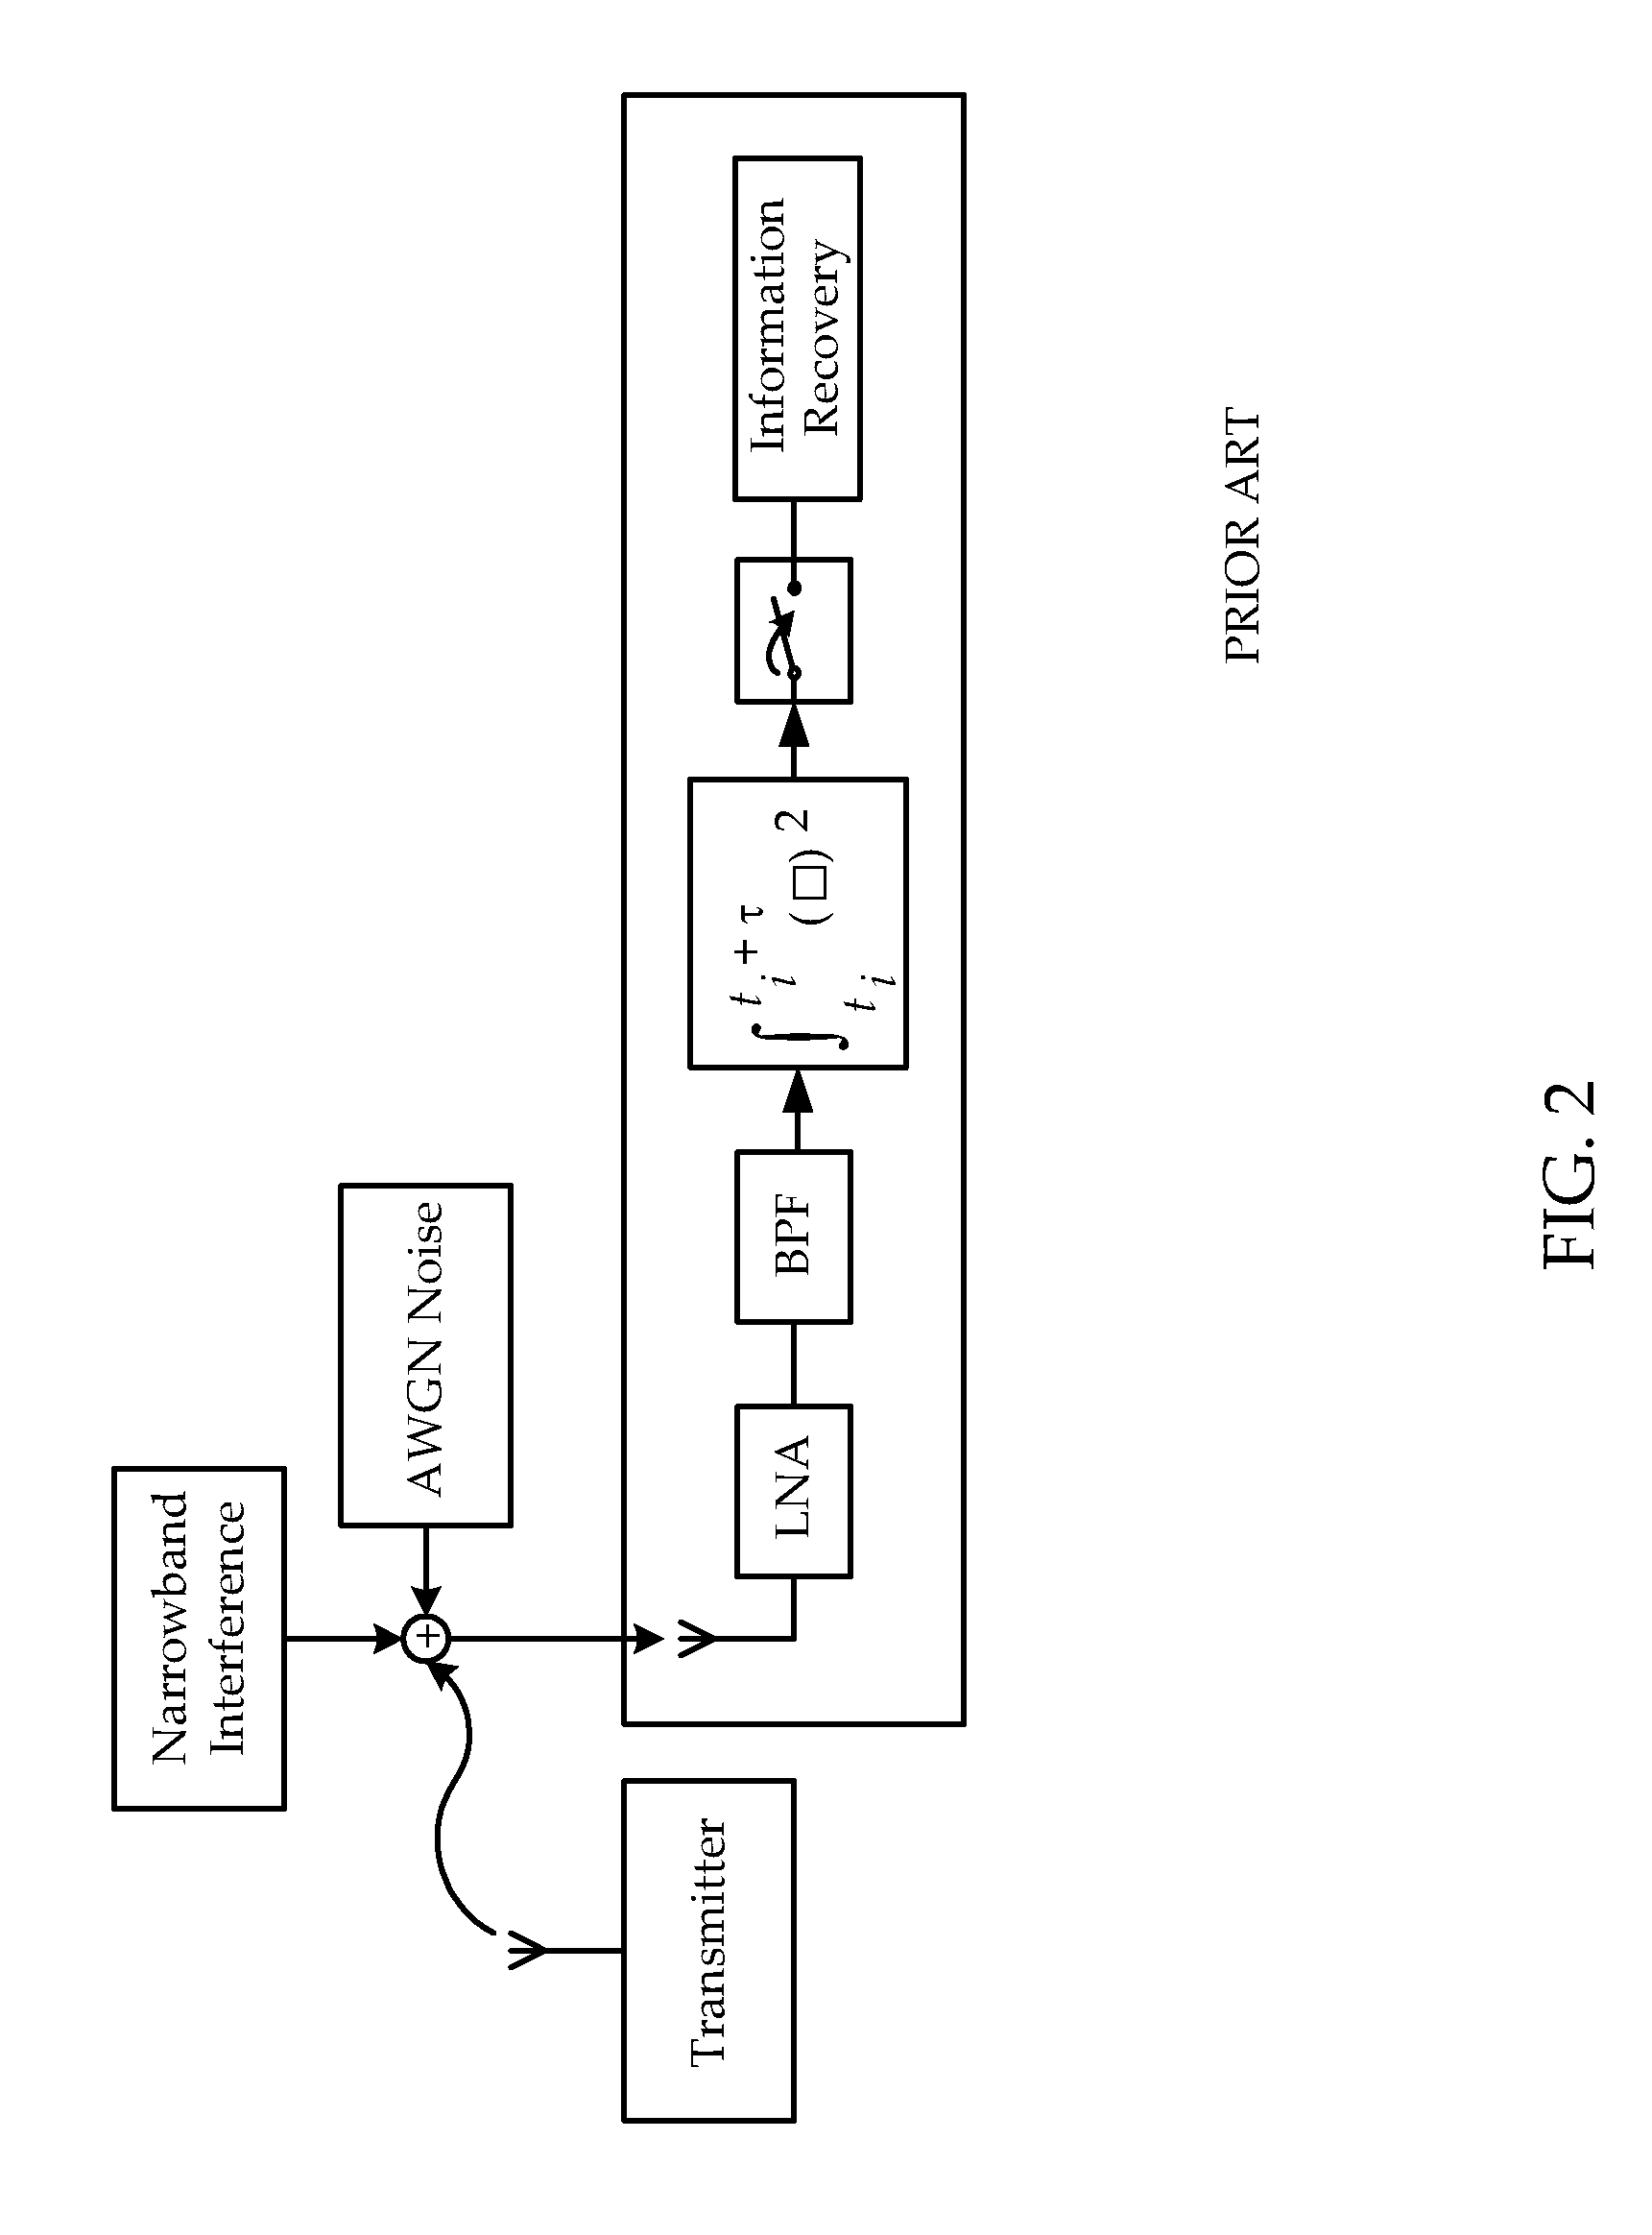 Nonlinear signal processing method and apparatus for pulsed-based ultra-wideband system